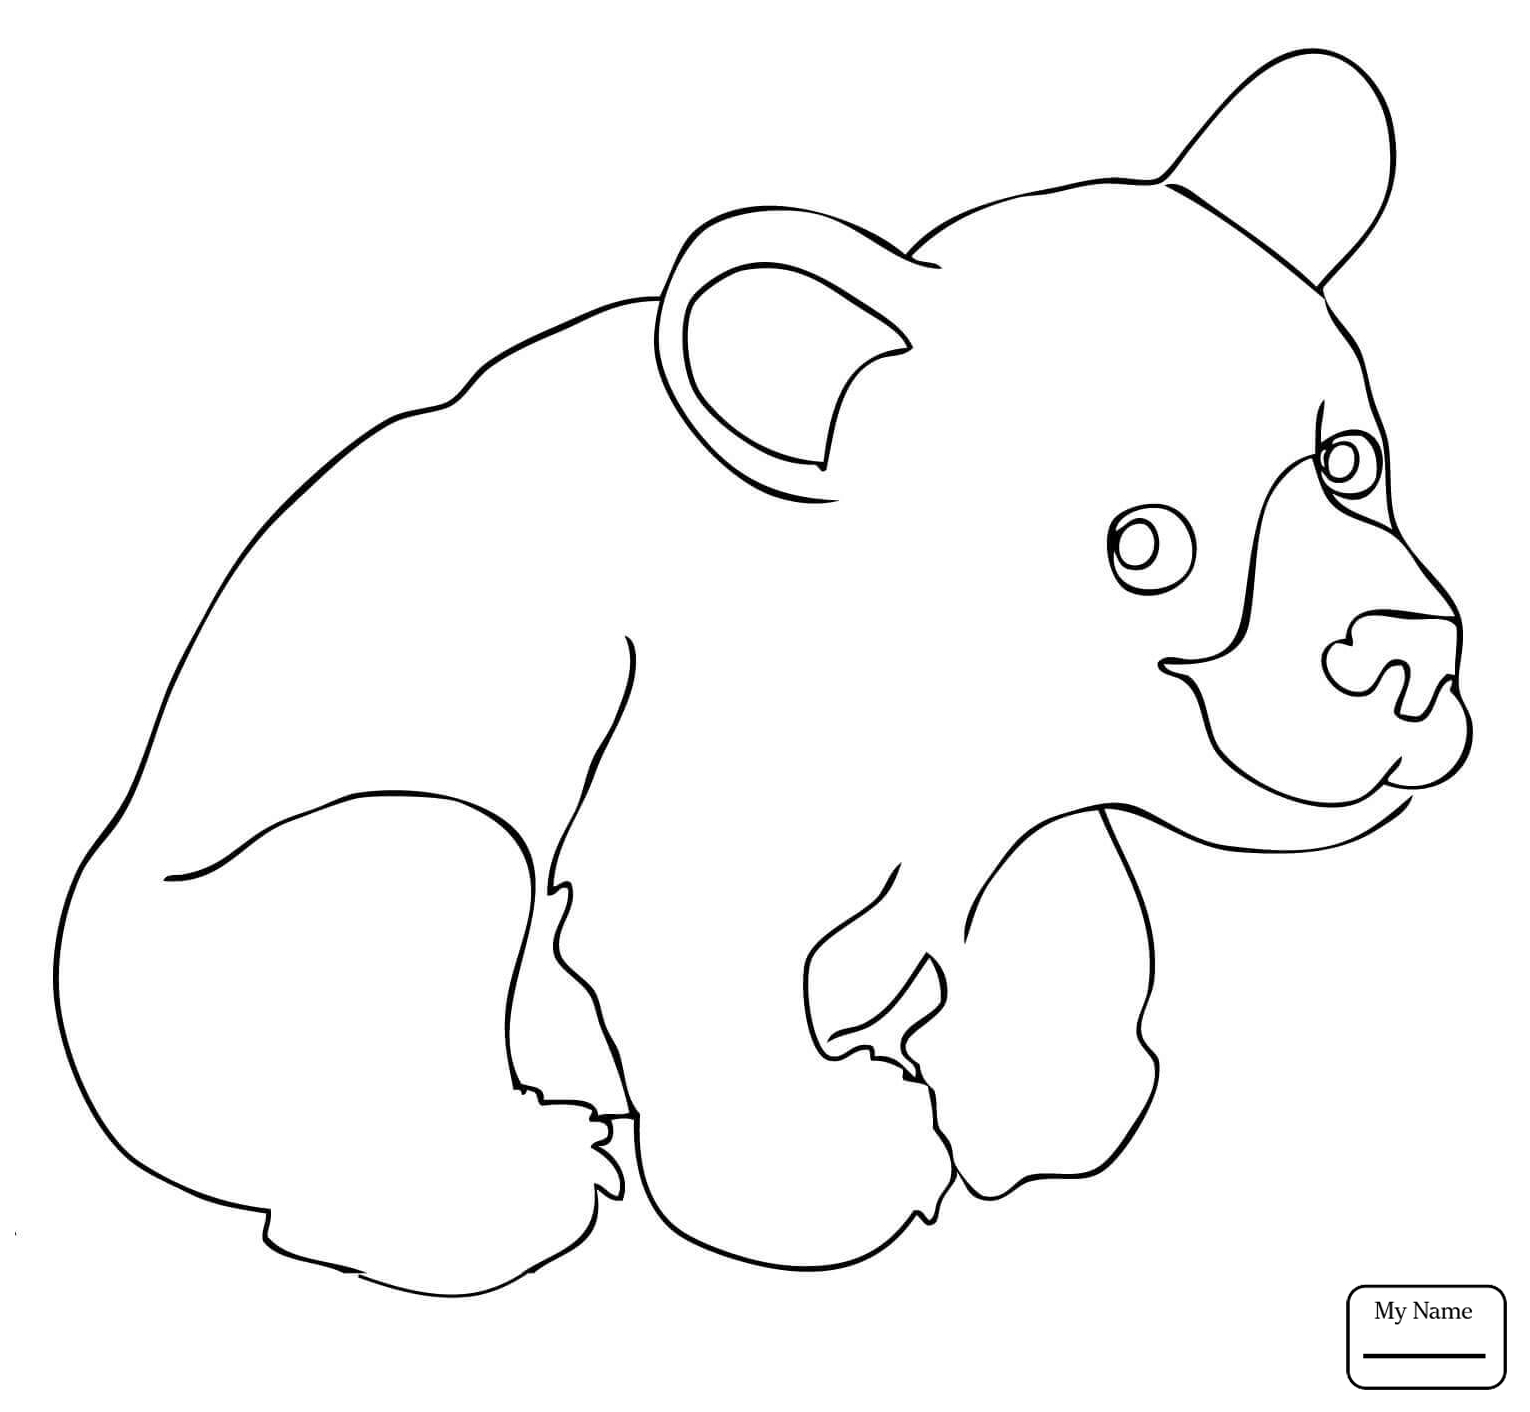 Coloring Pages Of Black Bears Coloring Pages Black Bear At Getdrawings Free For Personal Use